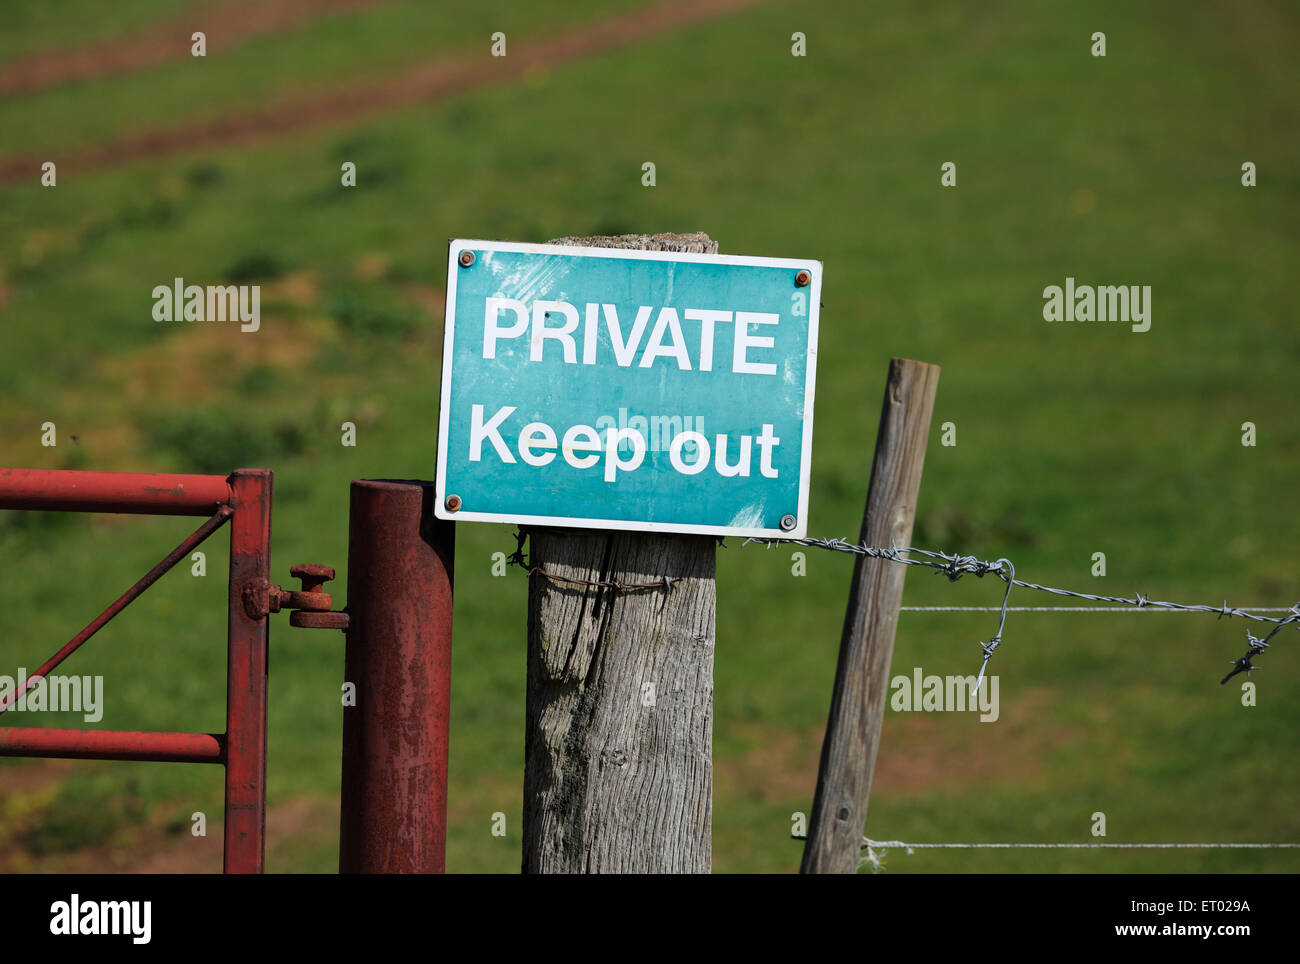 'PRIVATE Keep out' sign. Stock Photo